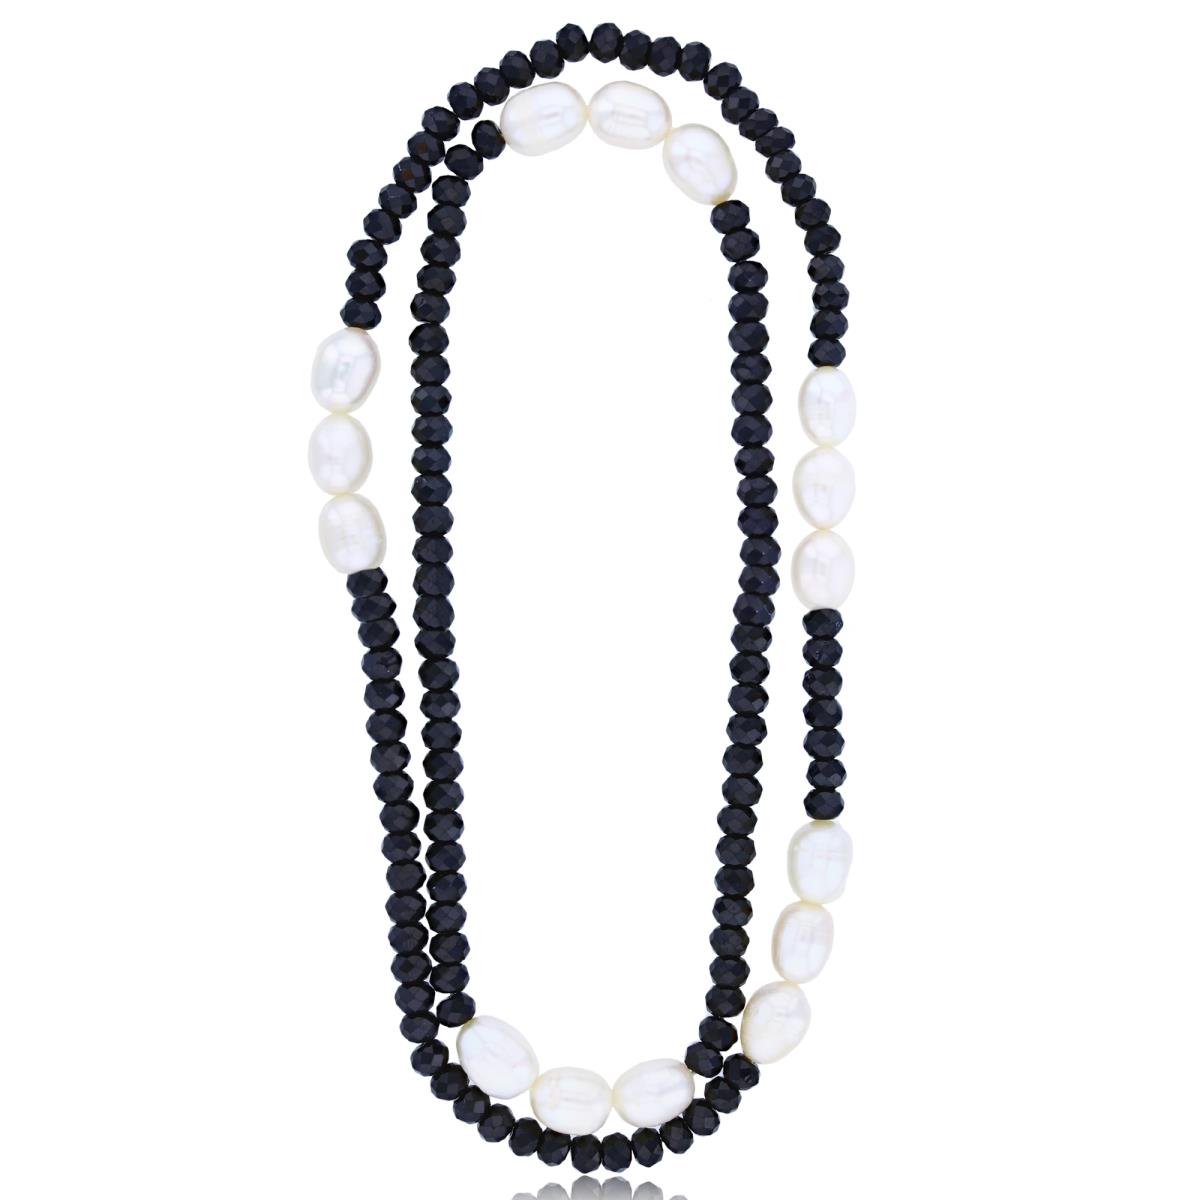 7-8mm Oval FWP & 4x5mm Black Spinel 42" Necklace